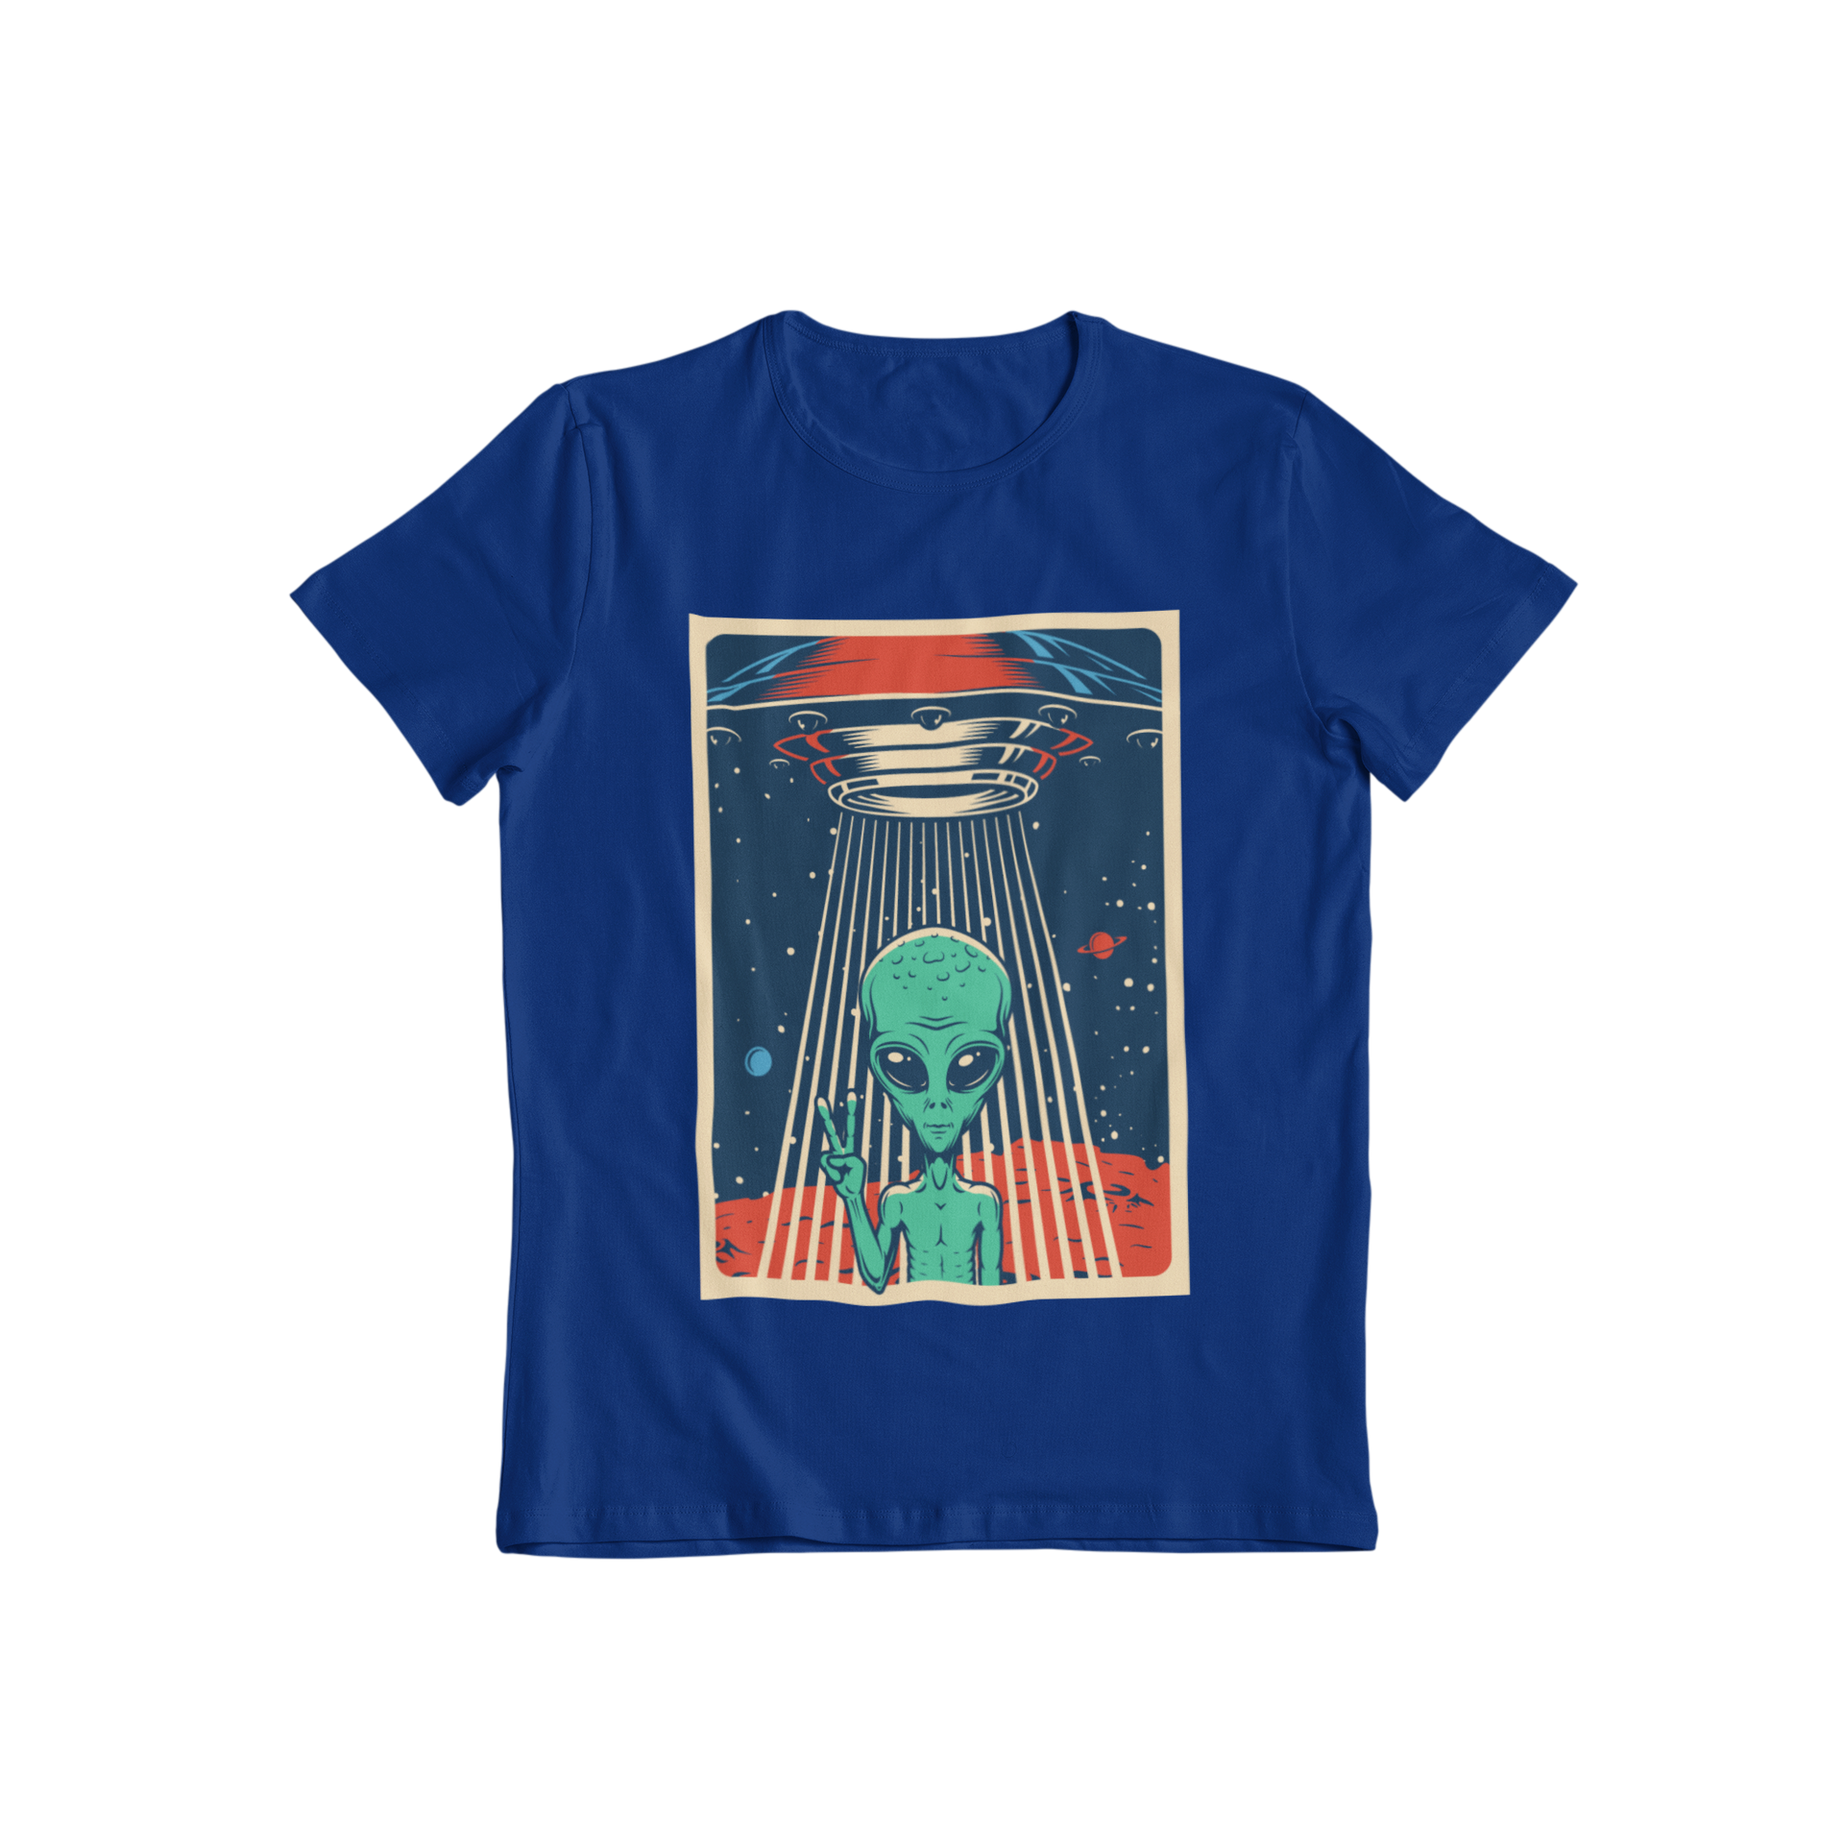 Get ready to be abducted by style with Teevolution's alien graphic t shirt. Our t-shirt features a UFO hovering over an alien, with a space scene in the background. Be a trendsetter and add this unique and creative tshirt to your wardrobe today!